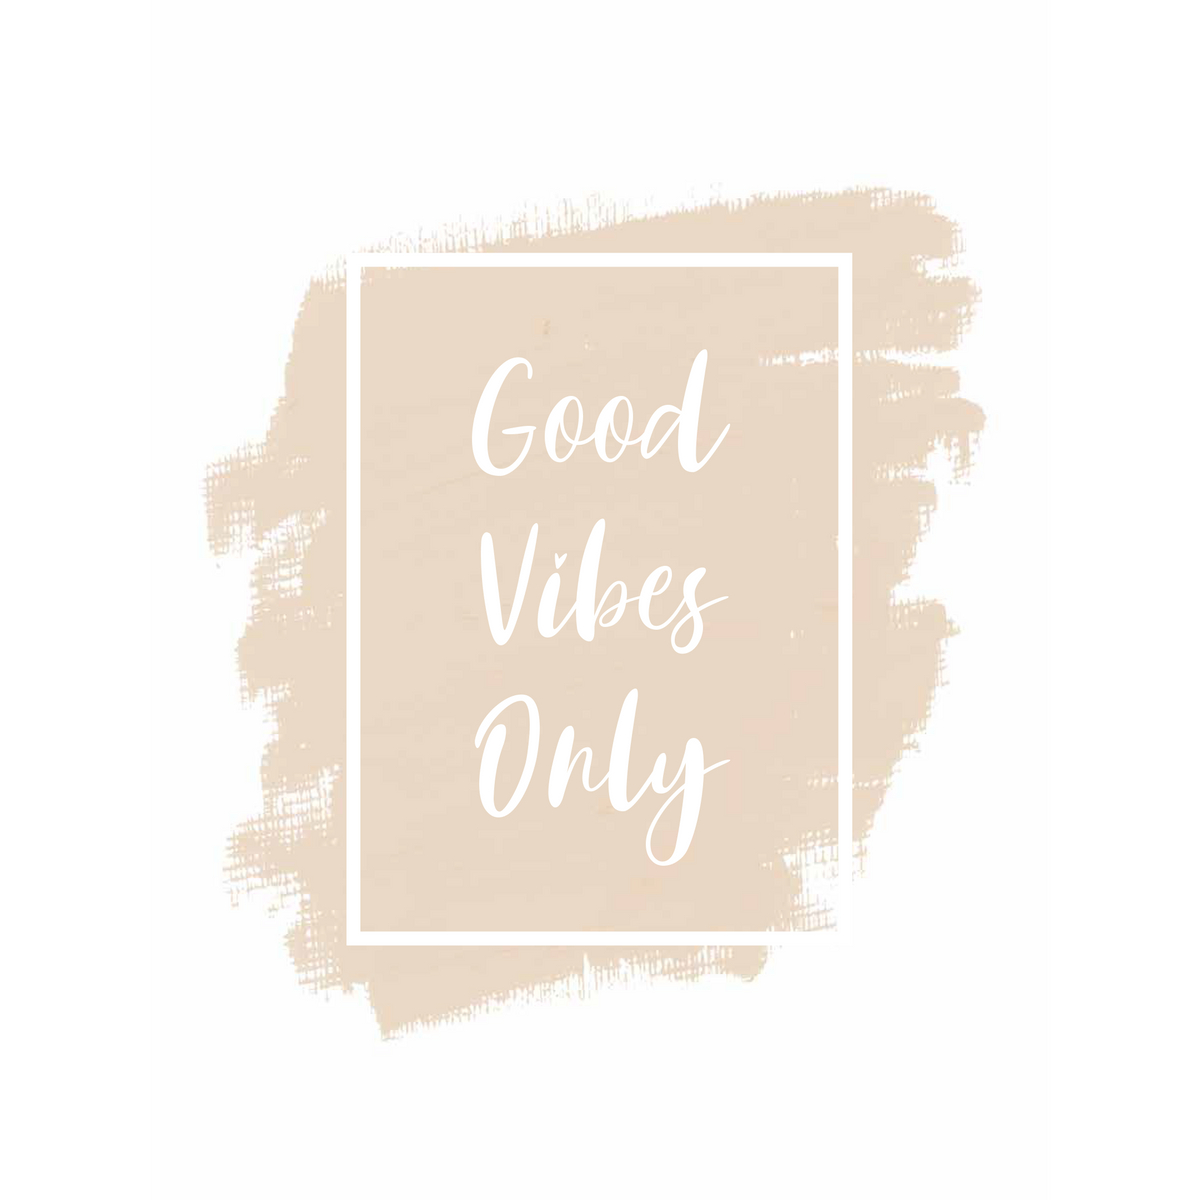 Good Vibes Only Print